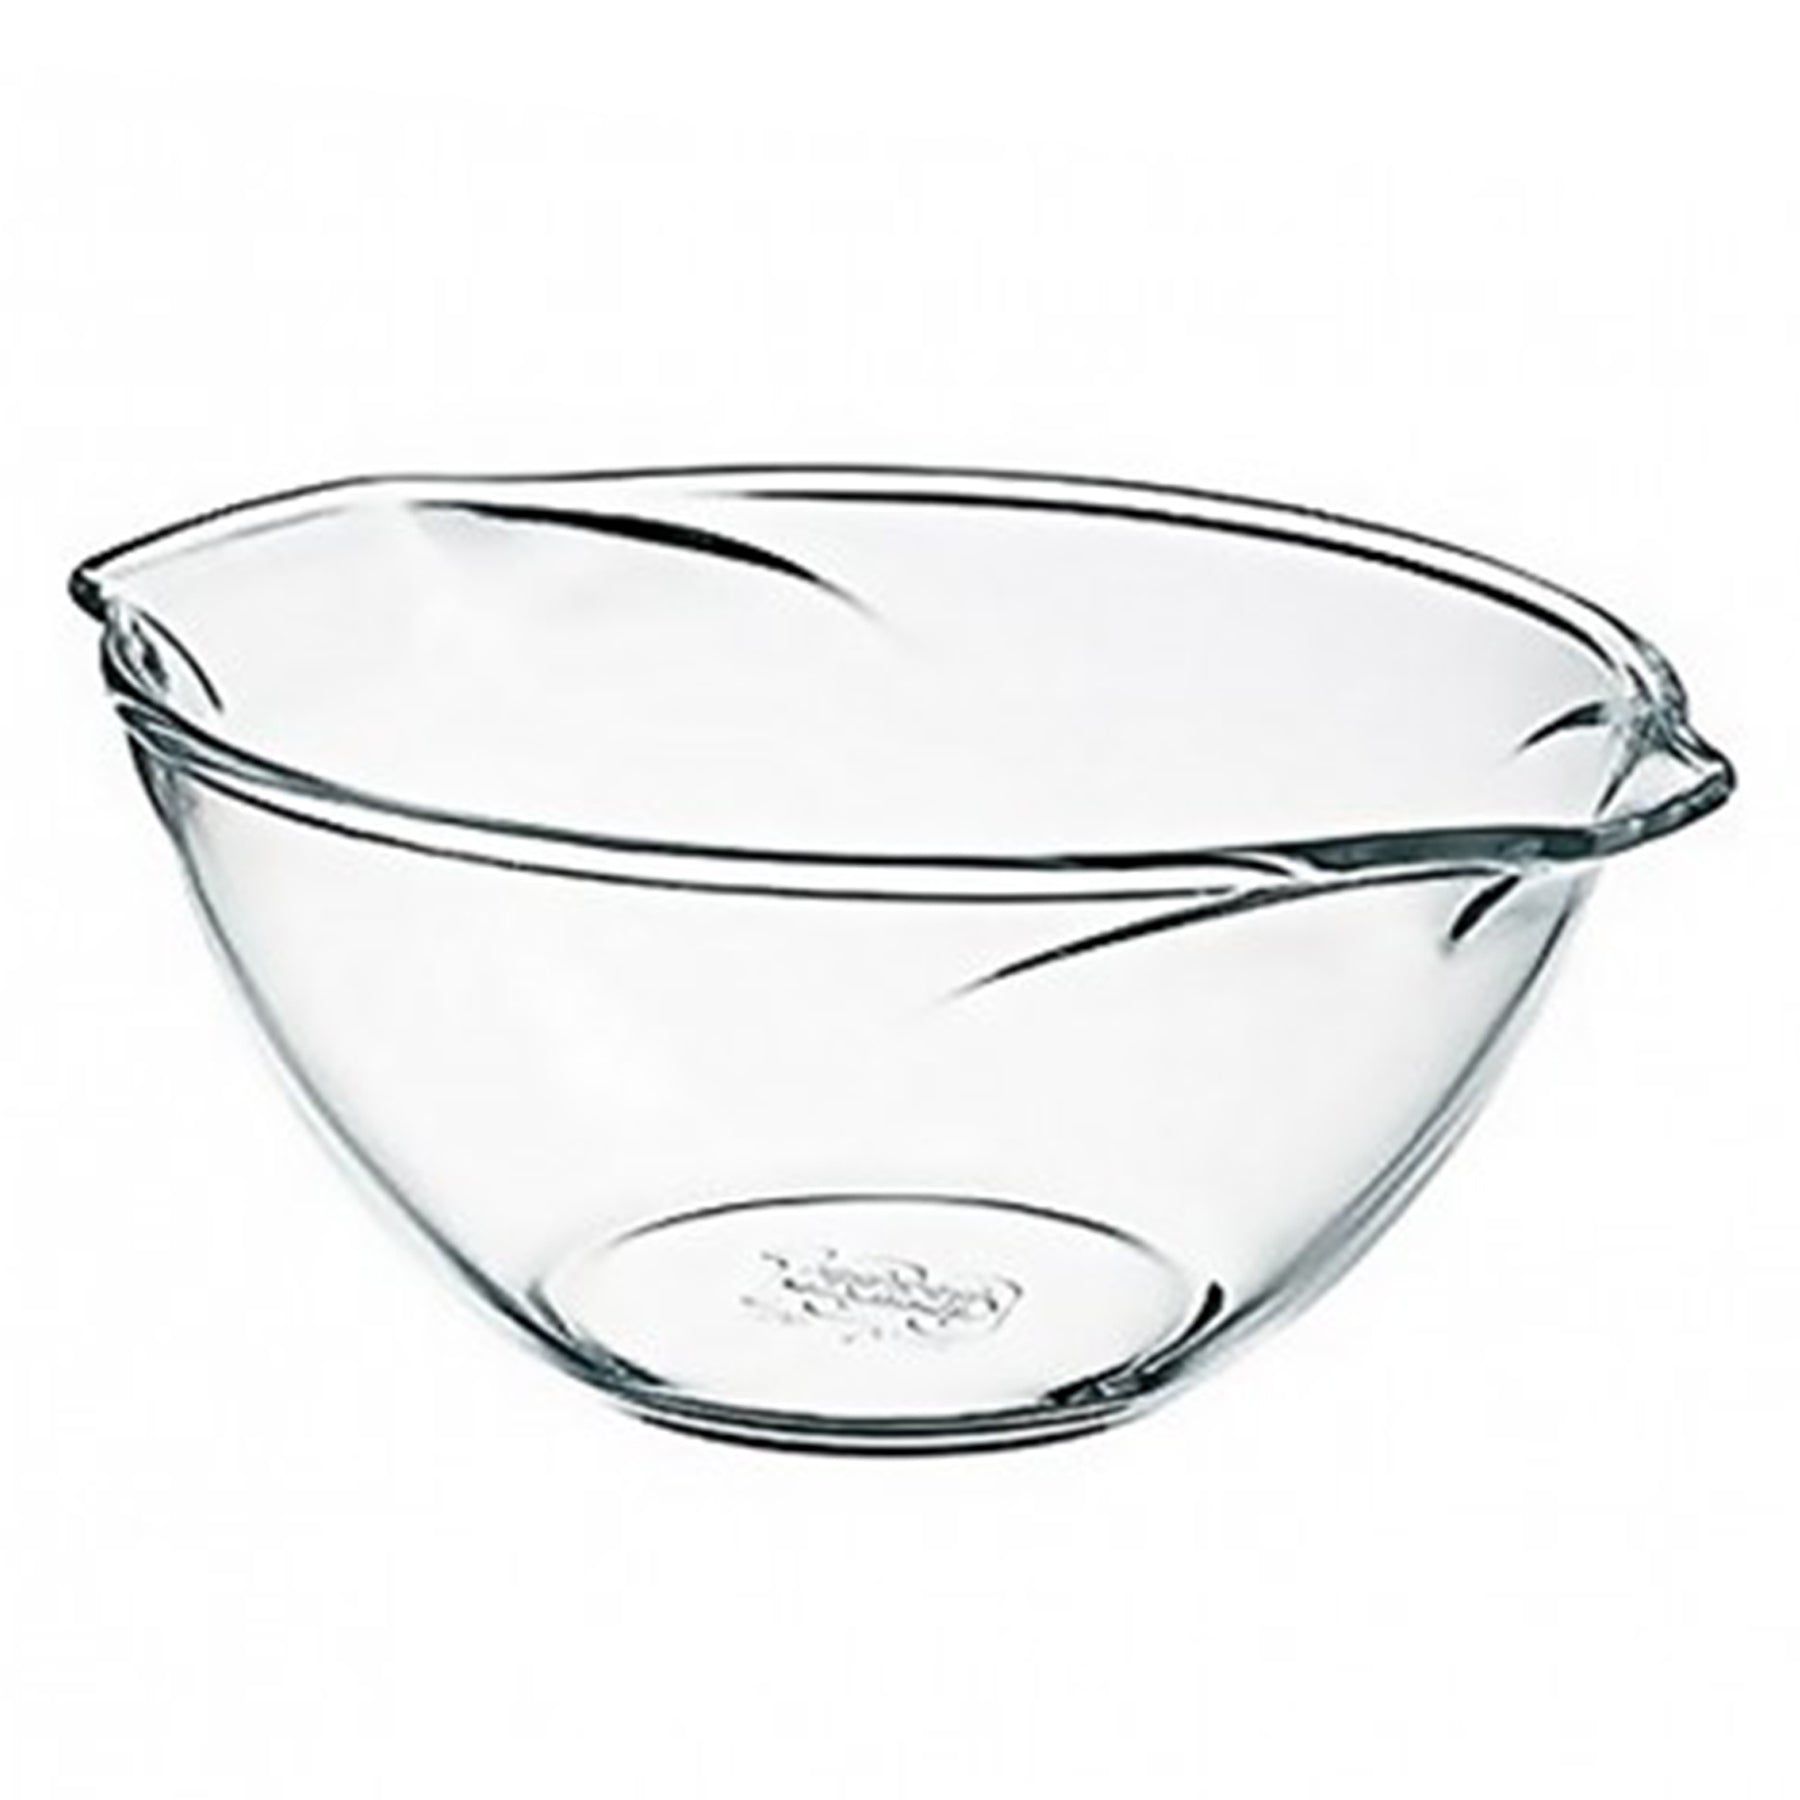 Pyrex bowl with handle and pourer